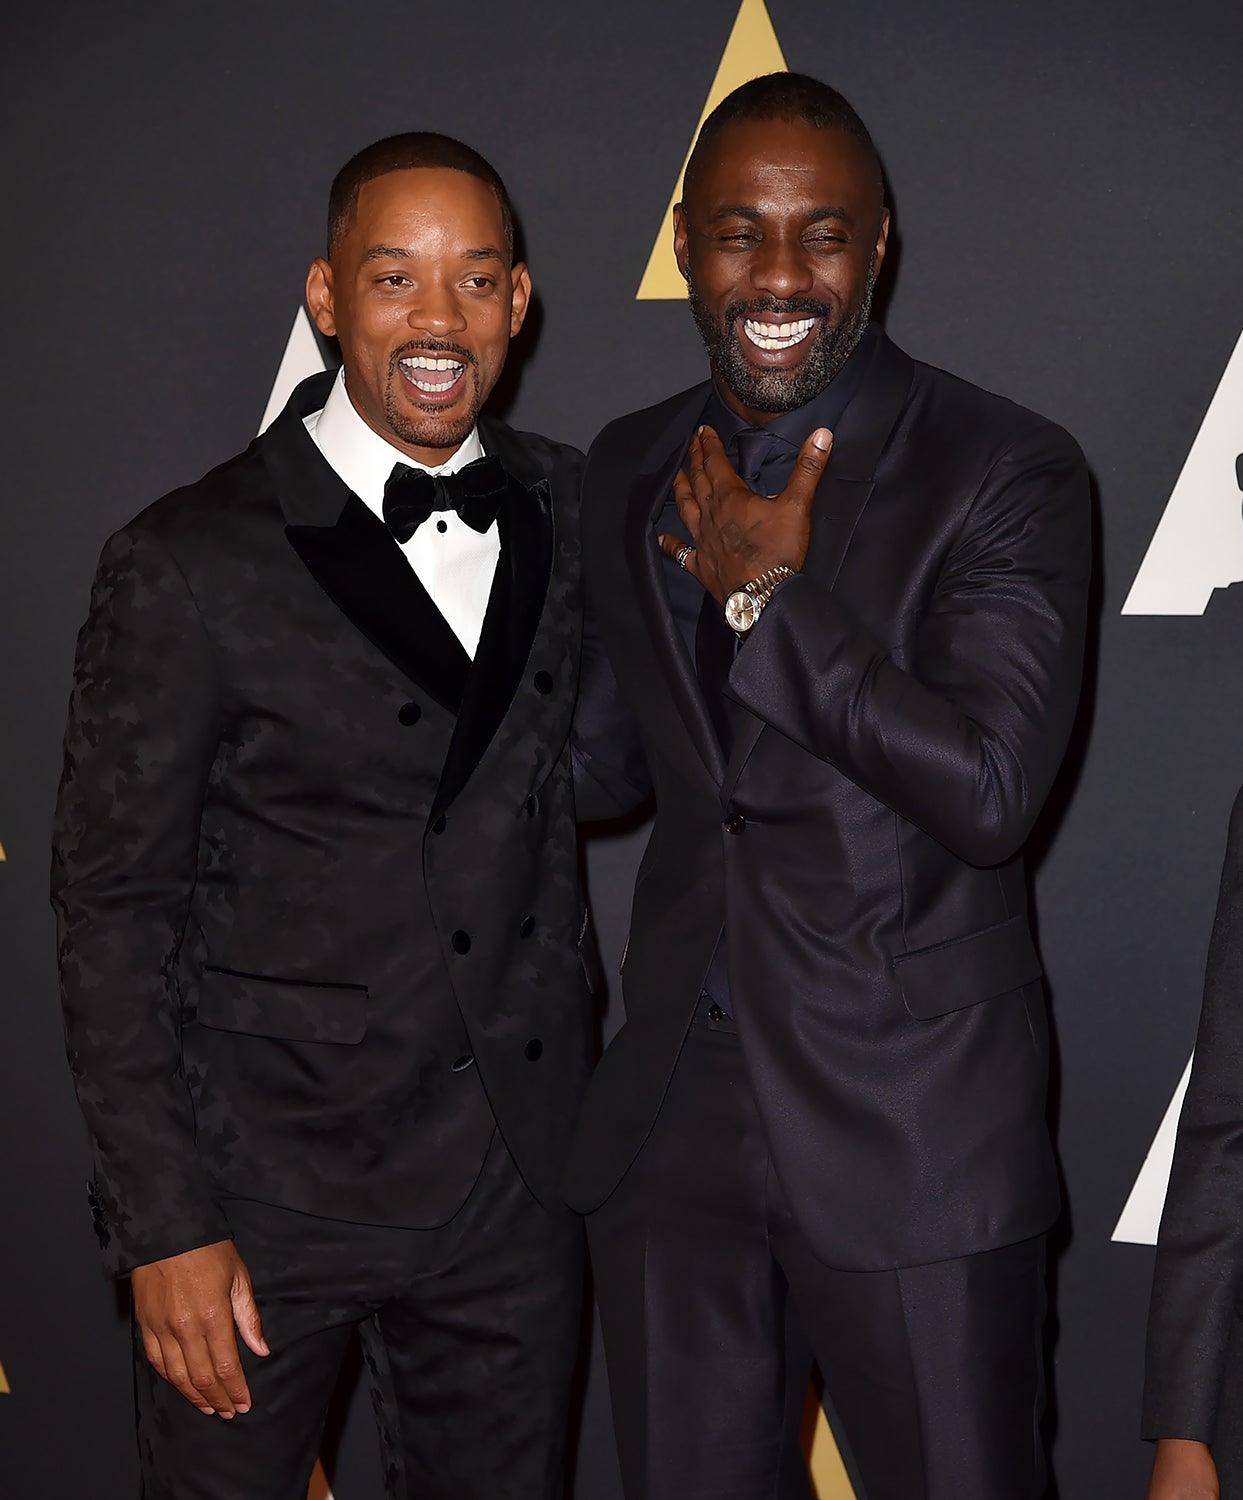 Will Smith, Idris Elba, LL Cool J and More!
